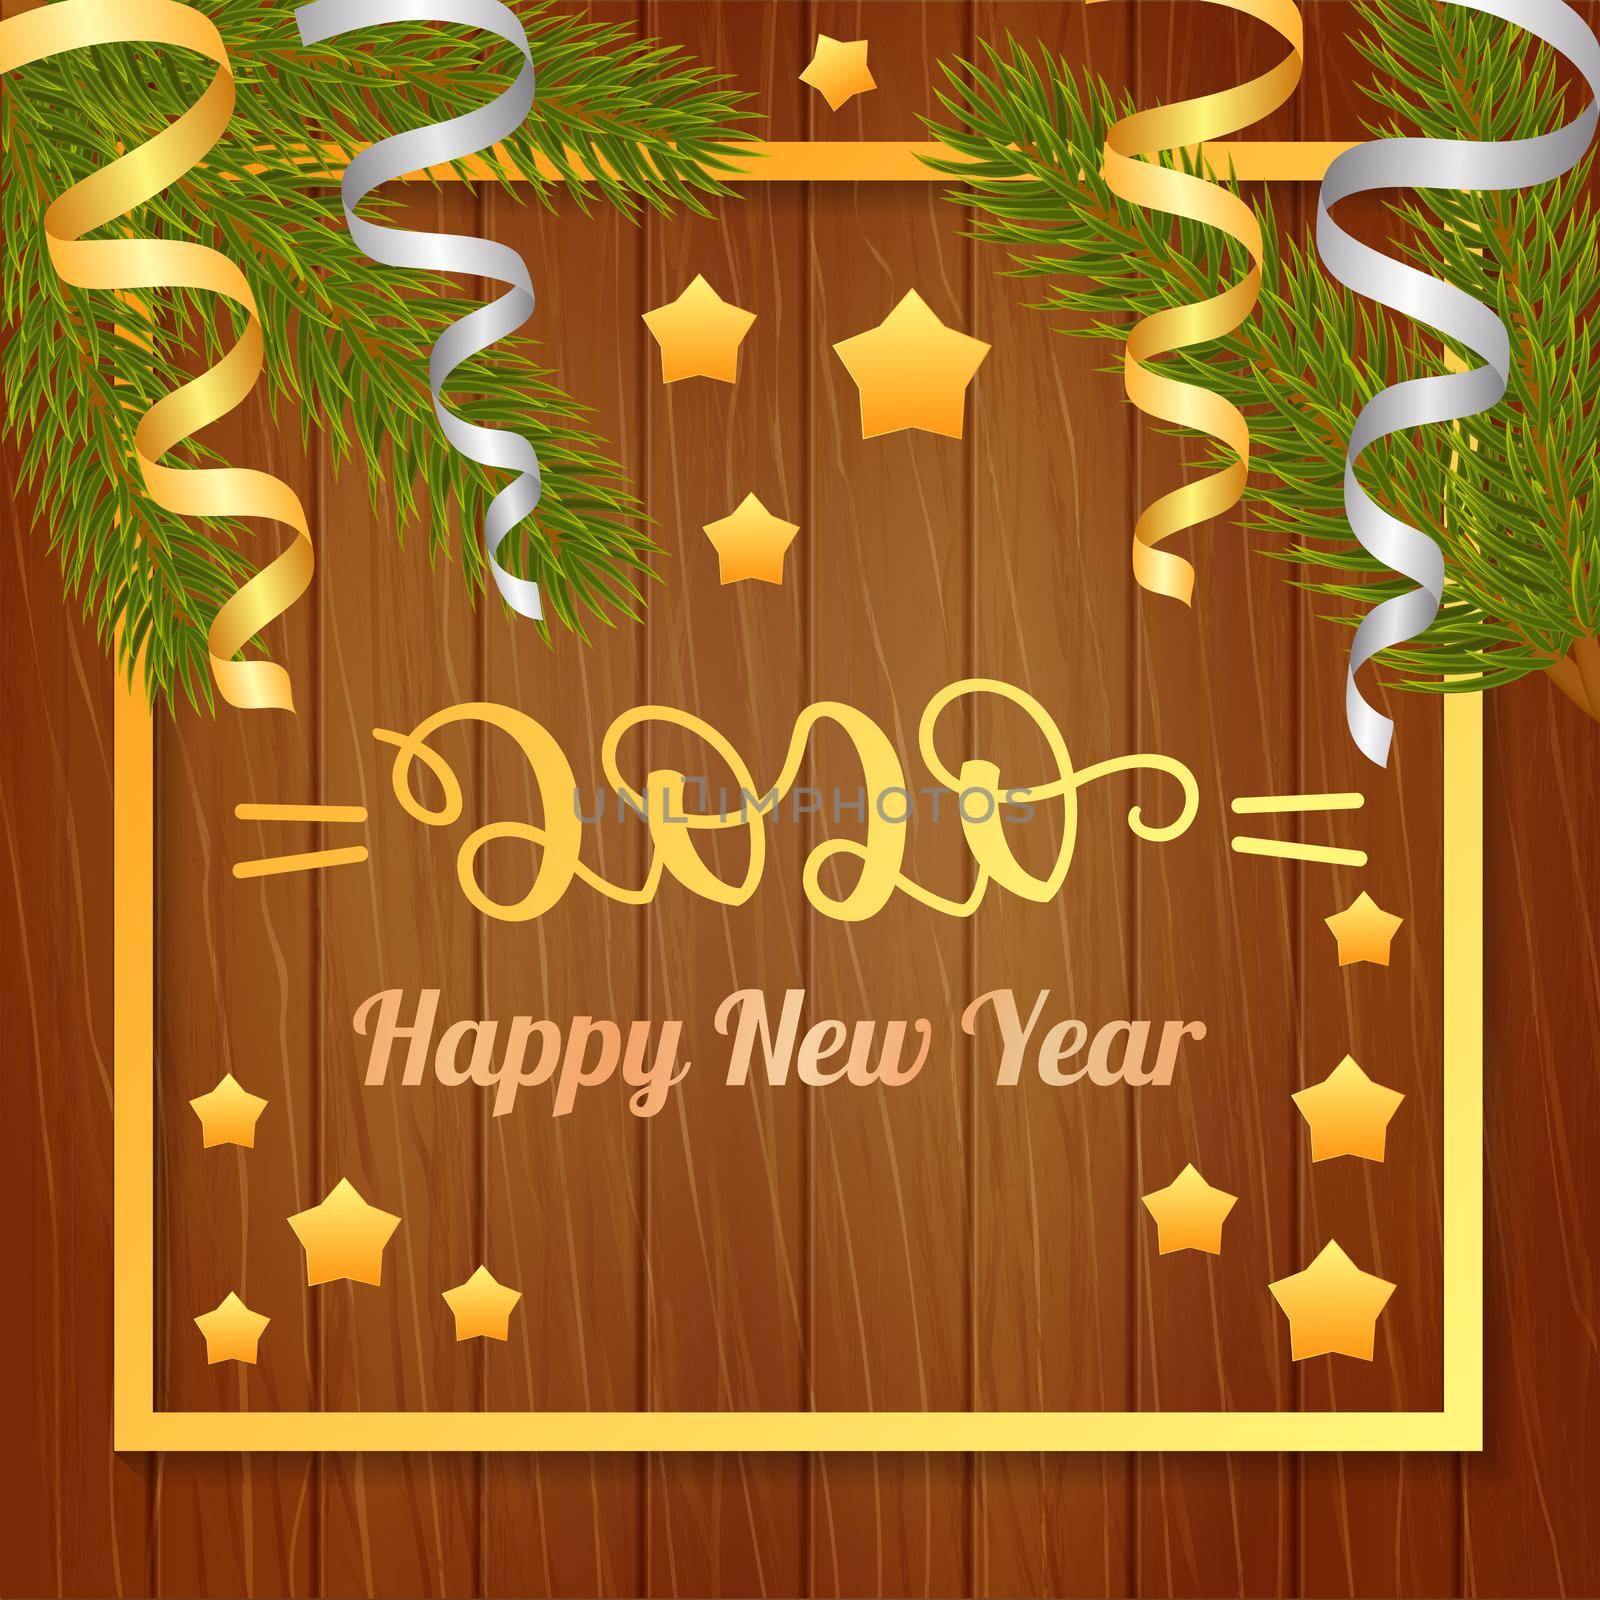 2020 Happy New Year. Lettering on wooden background with fir branches. illustrations for greeting cards, invitations, posters and other items.